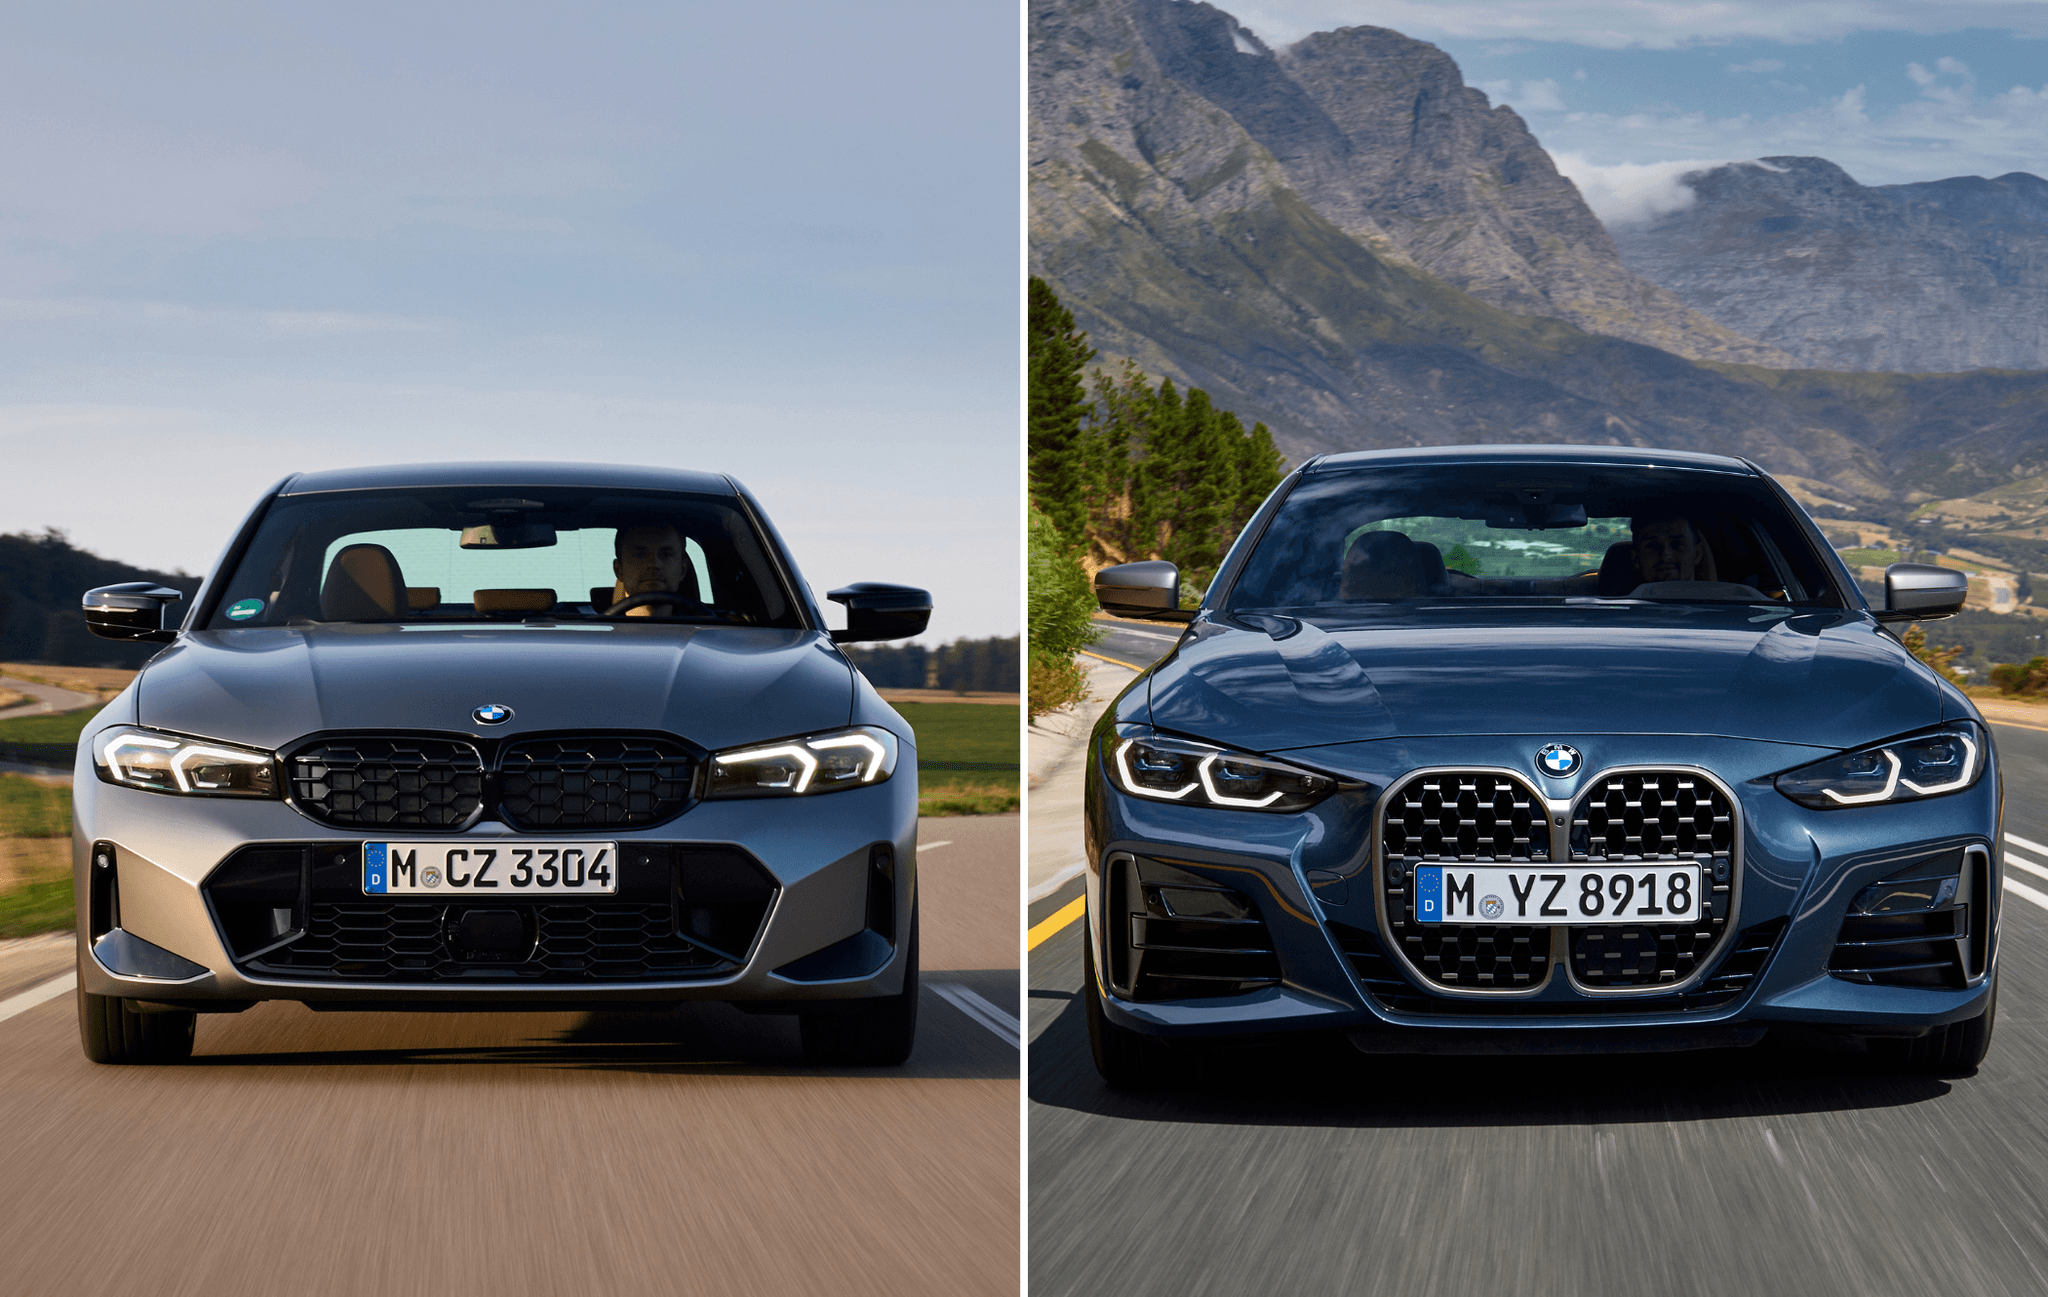 BMW 3 Series vs. BMW 4 Series which is better? cinch